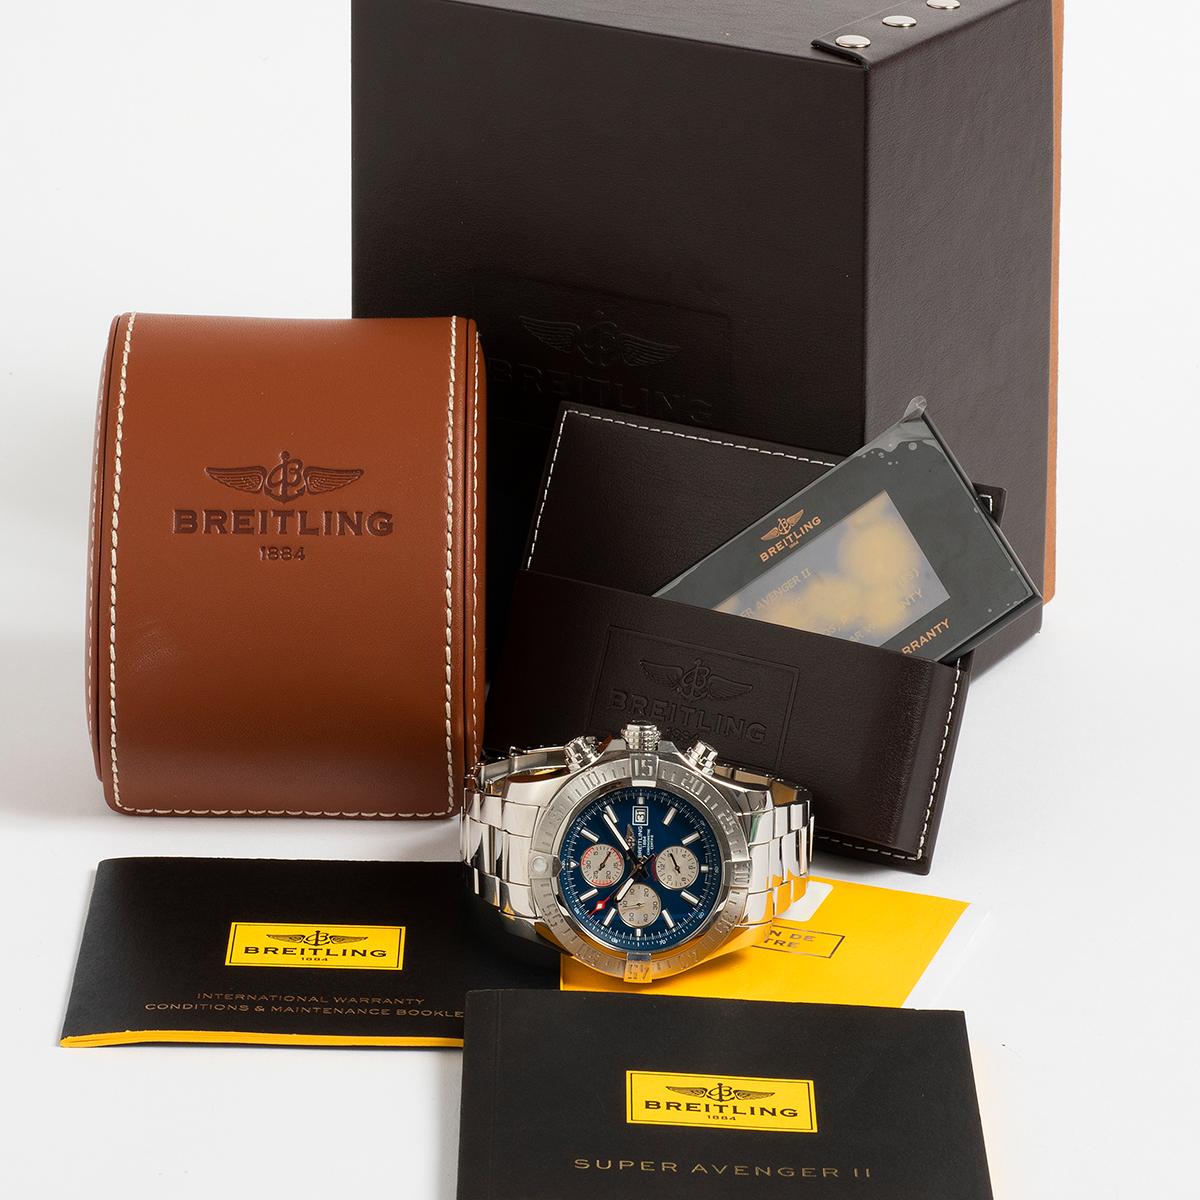 Our Breitling Super Avenger II Chronograph, reference A13371 , features a prominent stainless steel 48mm case, unusual blue dial with white subdials and a stainless steel bracelet. This attractive sports chronograph is presented in outstanding